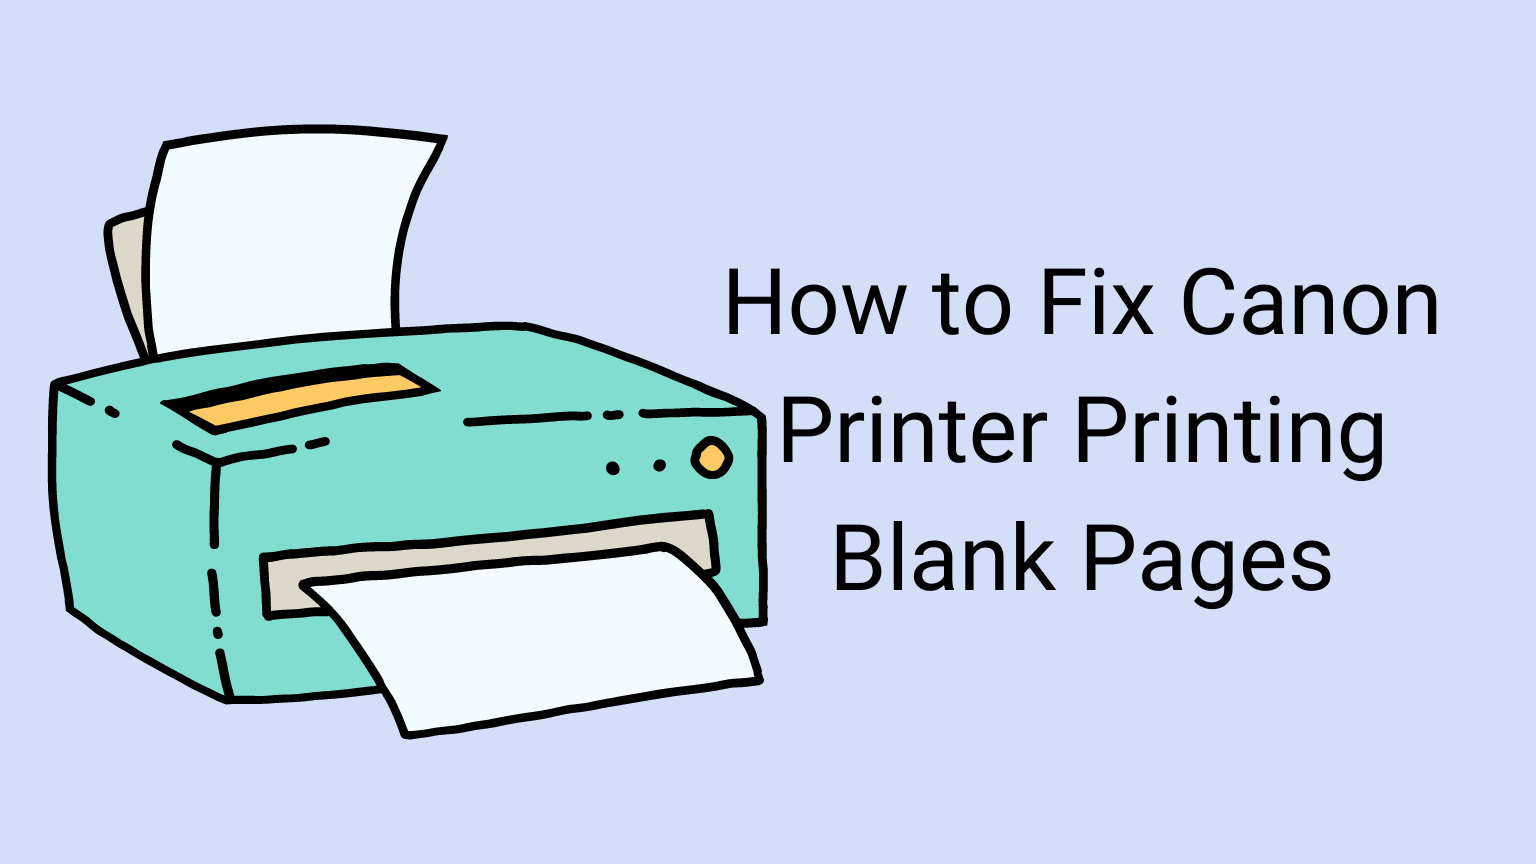 How to Fix Canon Printer Printing Blank Pages